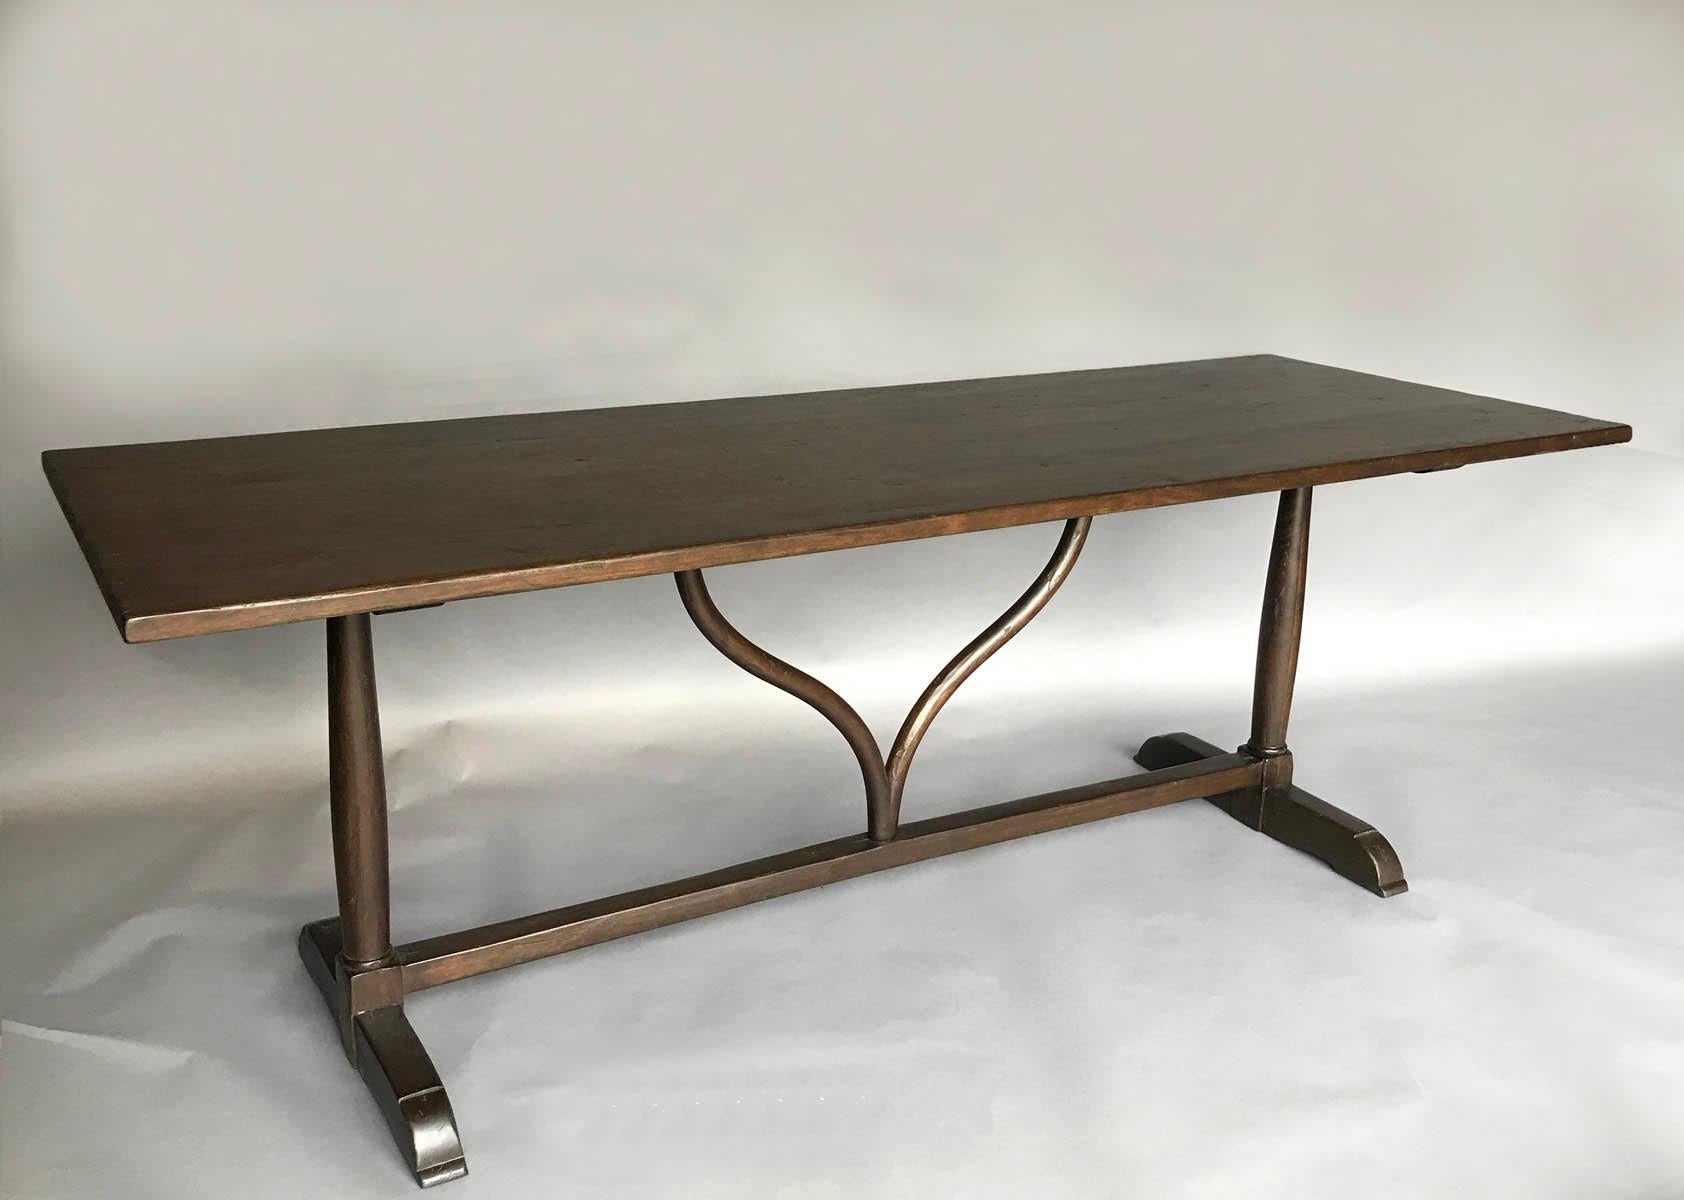 This is our custom wishbone winery table that can be made in any size and with any finish, in a range of colors and distresses. This particular table was going to be used as a desk so the wishbone stretcher is turned the same direction as the length